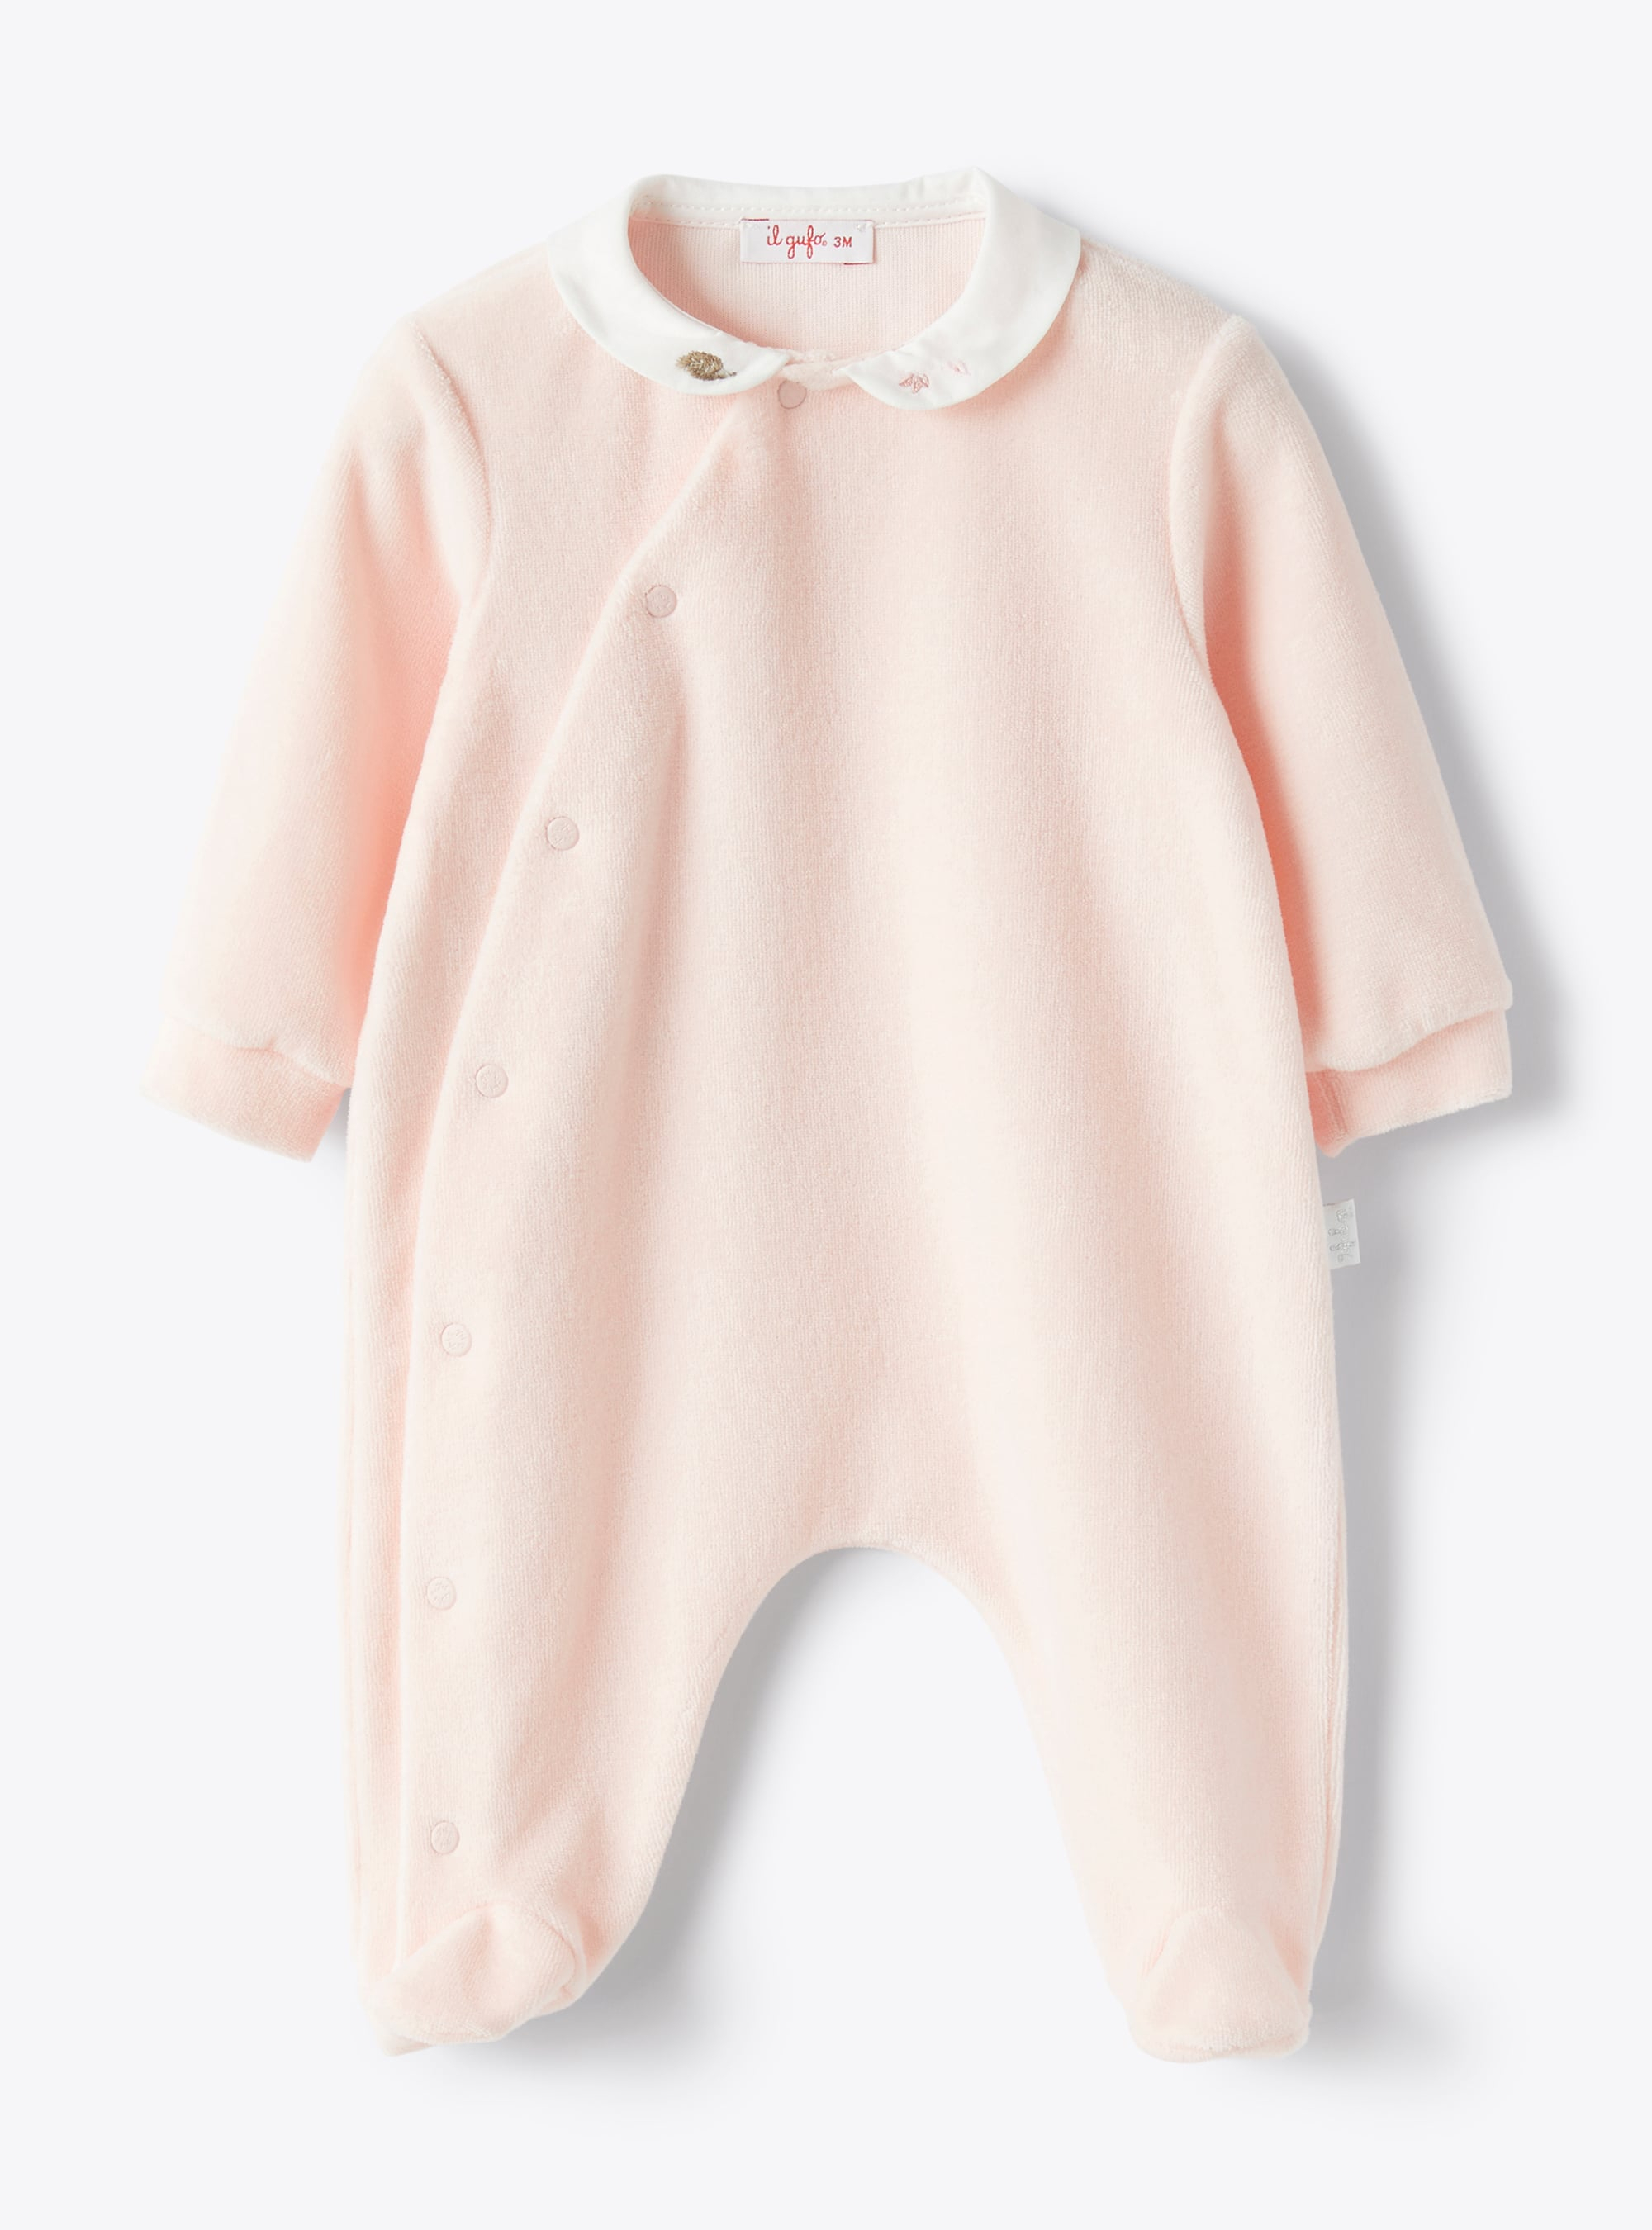 Babysuit in pink chenille with embroidered details - Babygrows - Il Gufo